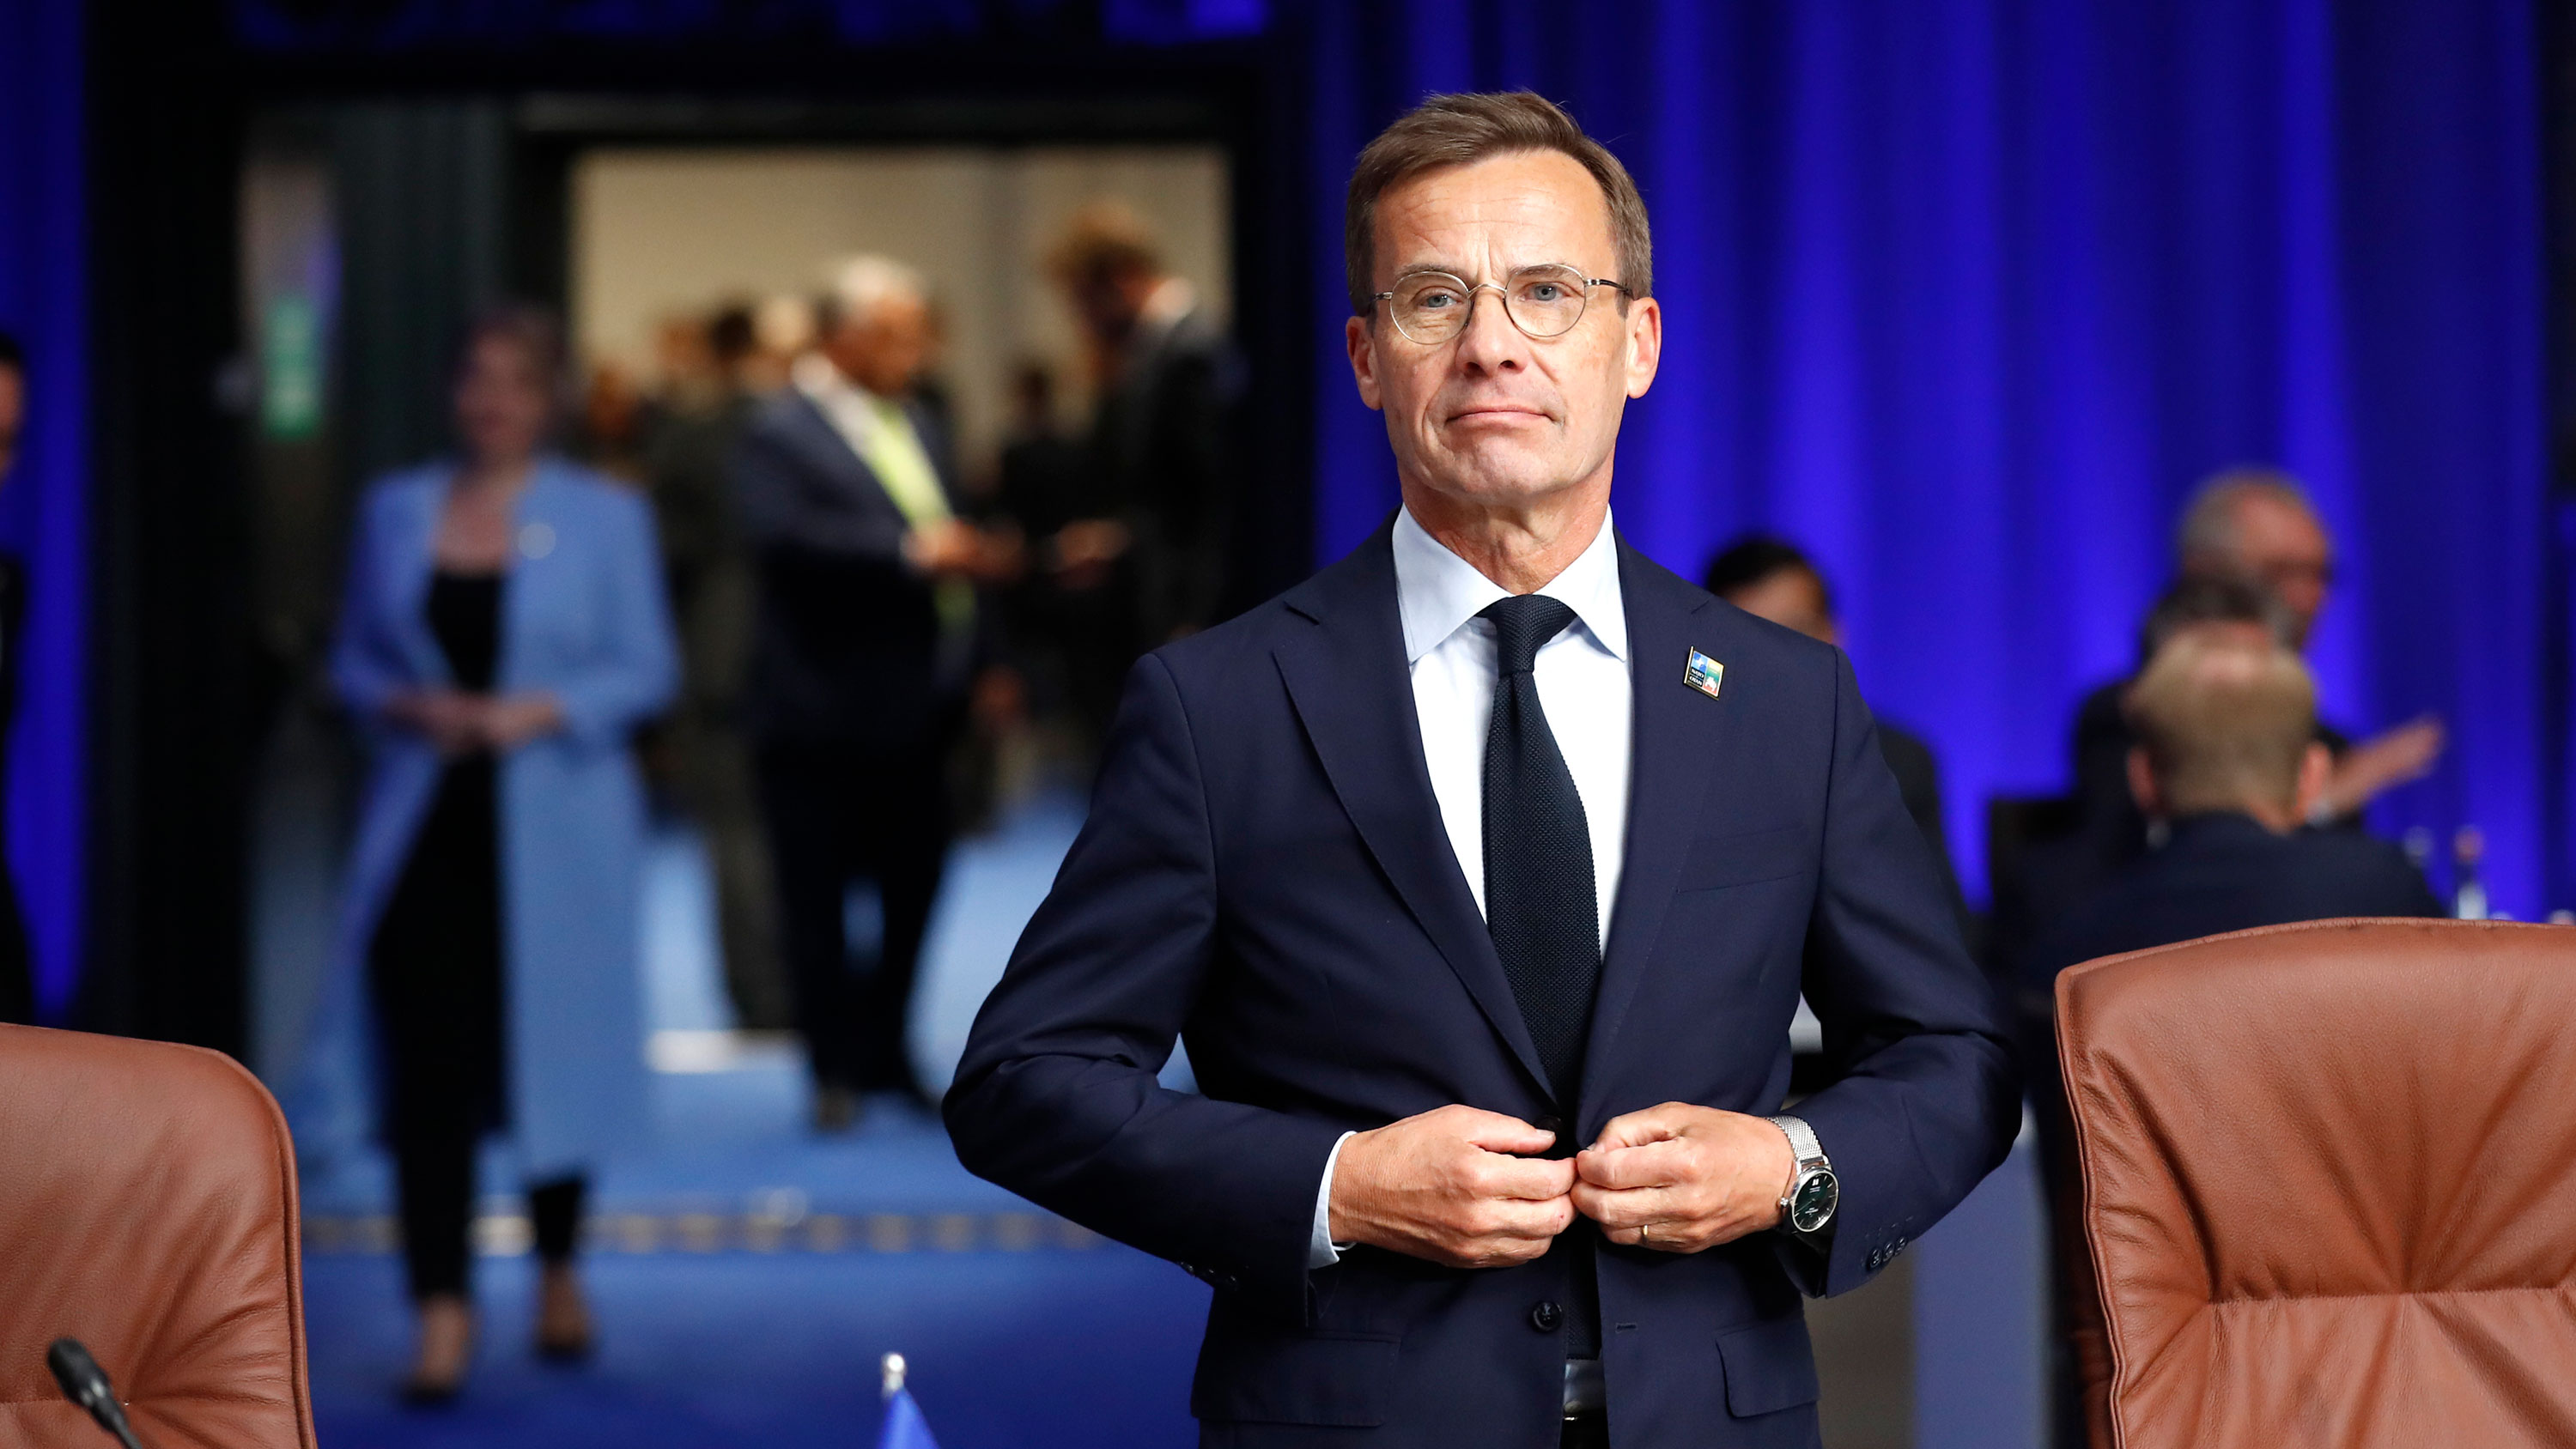 Swedish Prime Minister Ulf Kristersson arrives for a round table meeting of the North Atlantic Council during the NATO summit in Vilnius, Lithuania, on Tuesday.